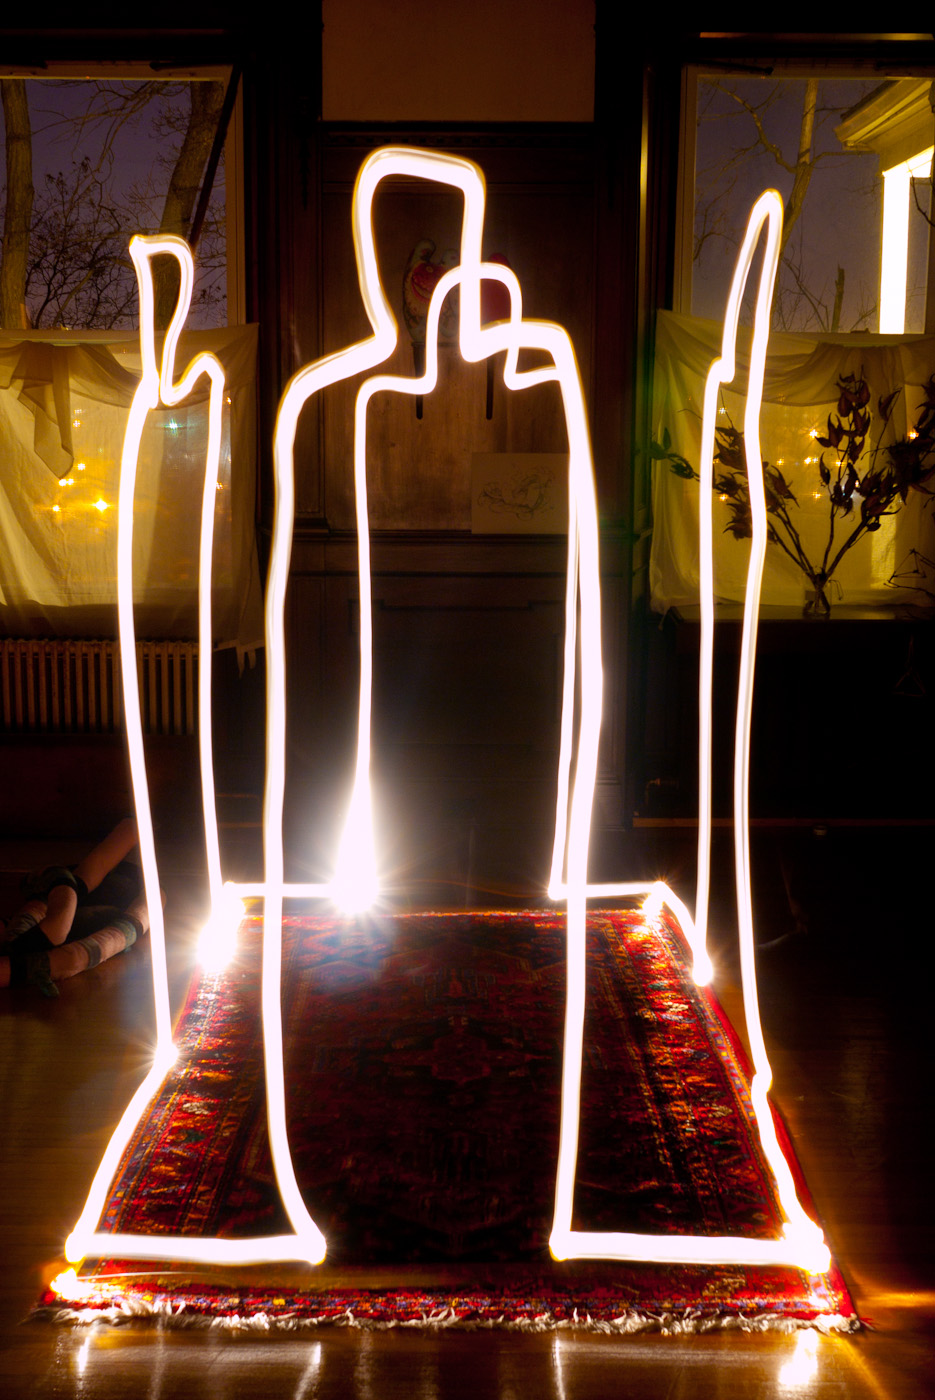 Light trails drawing of four figures standing in a rectangle that looks like a house.